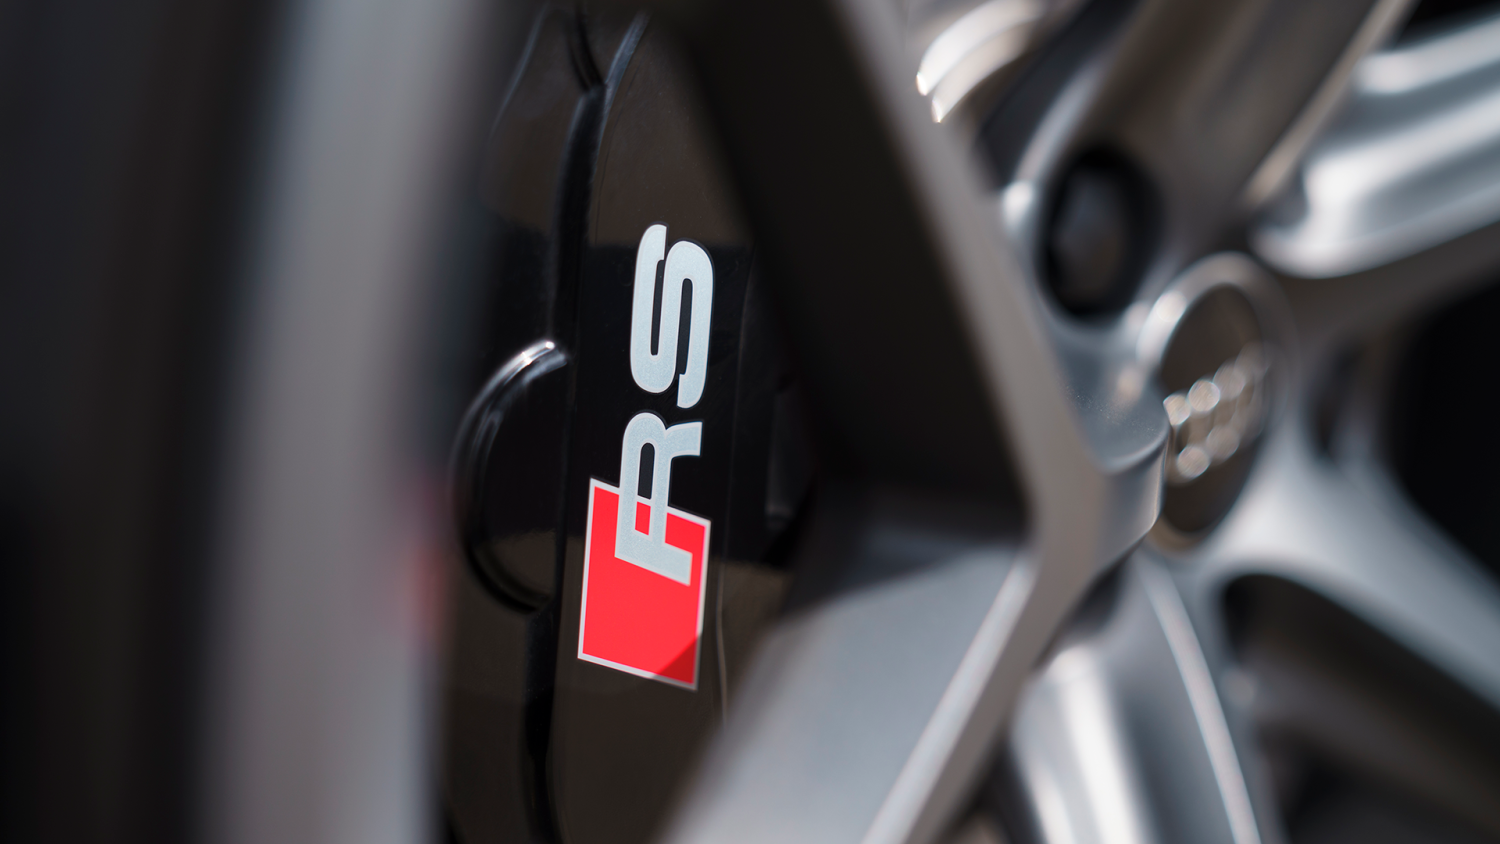 New Audi RS Petrol Models Will Get Their Own Platform